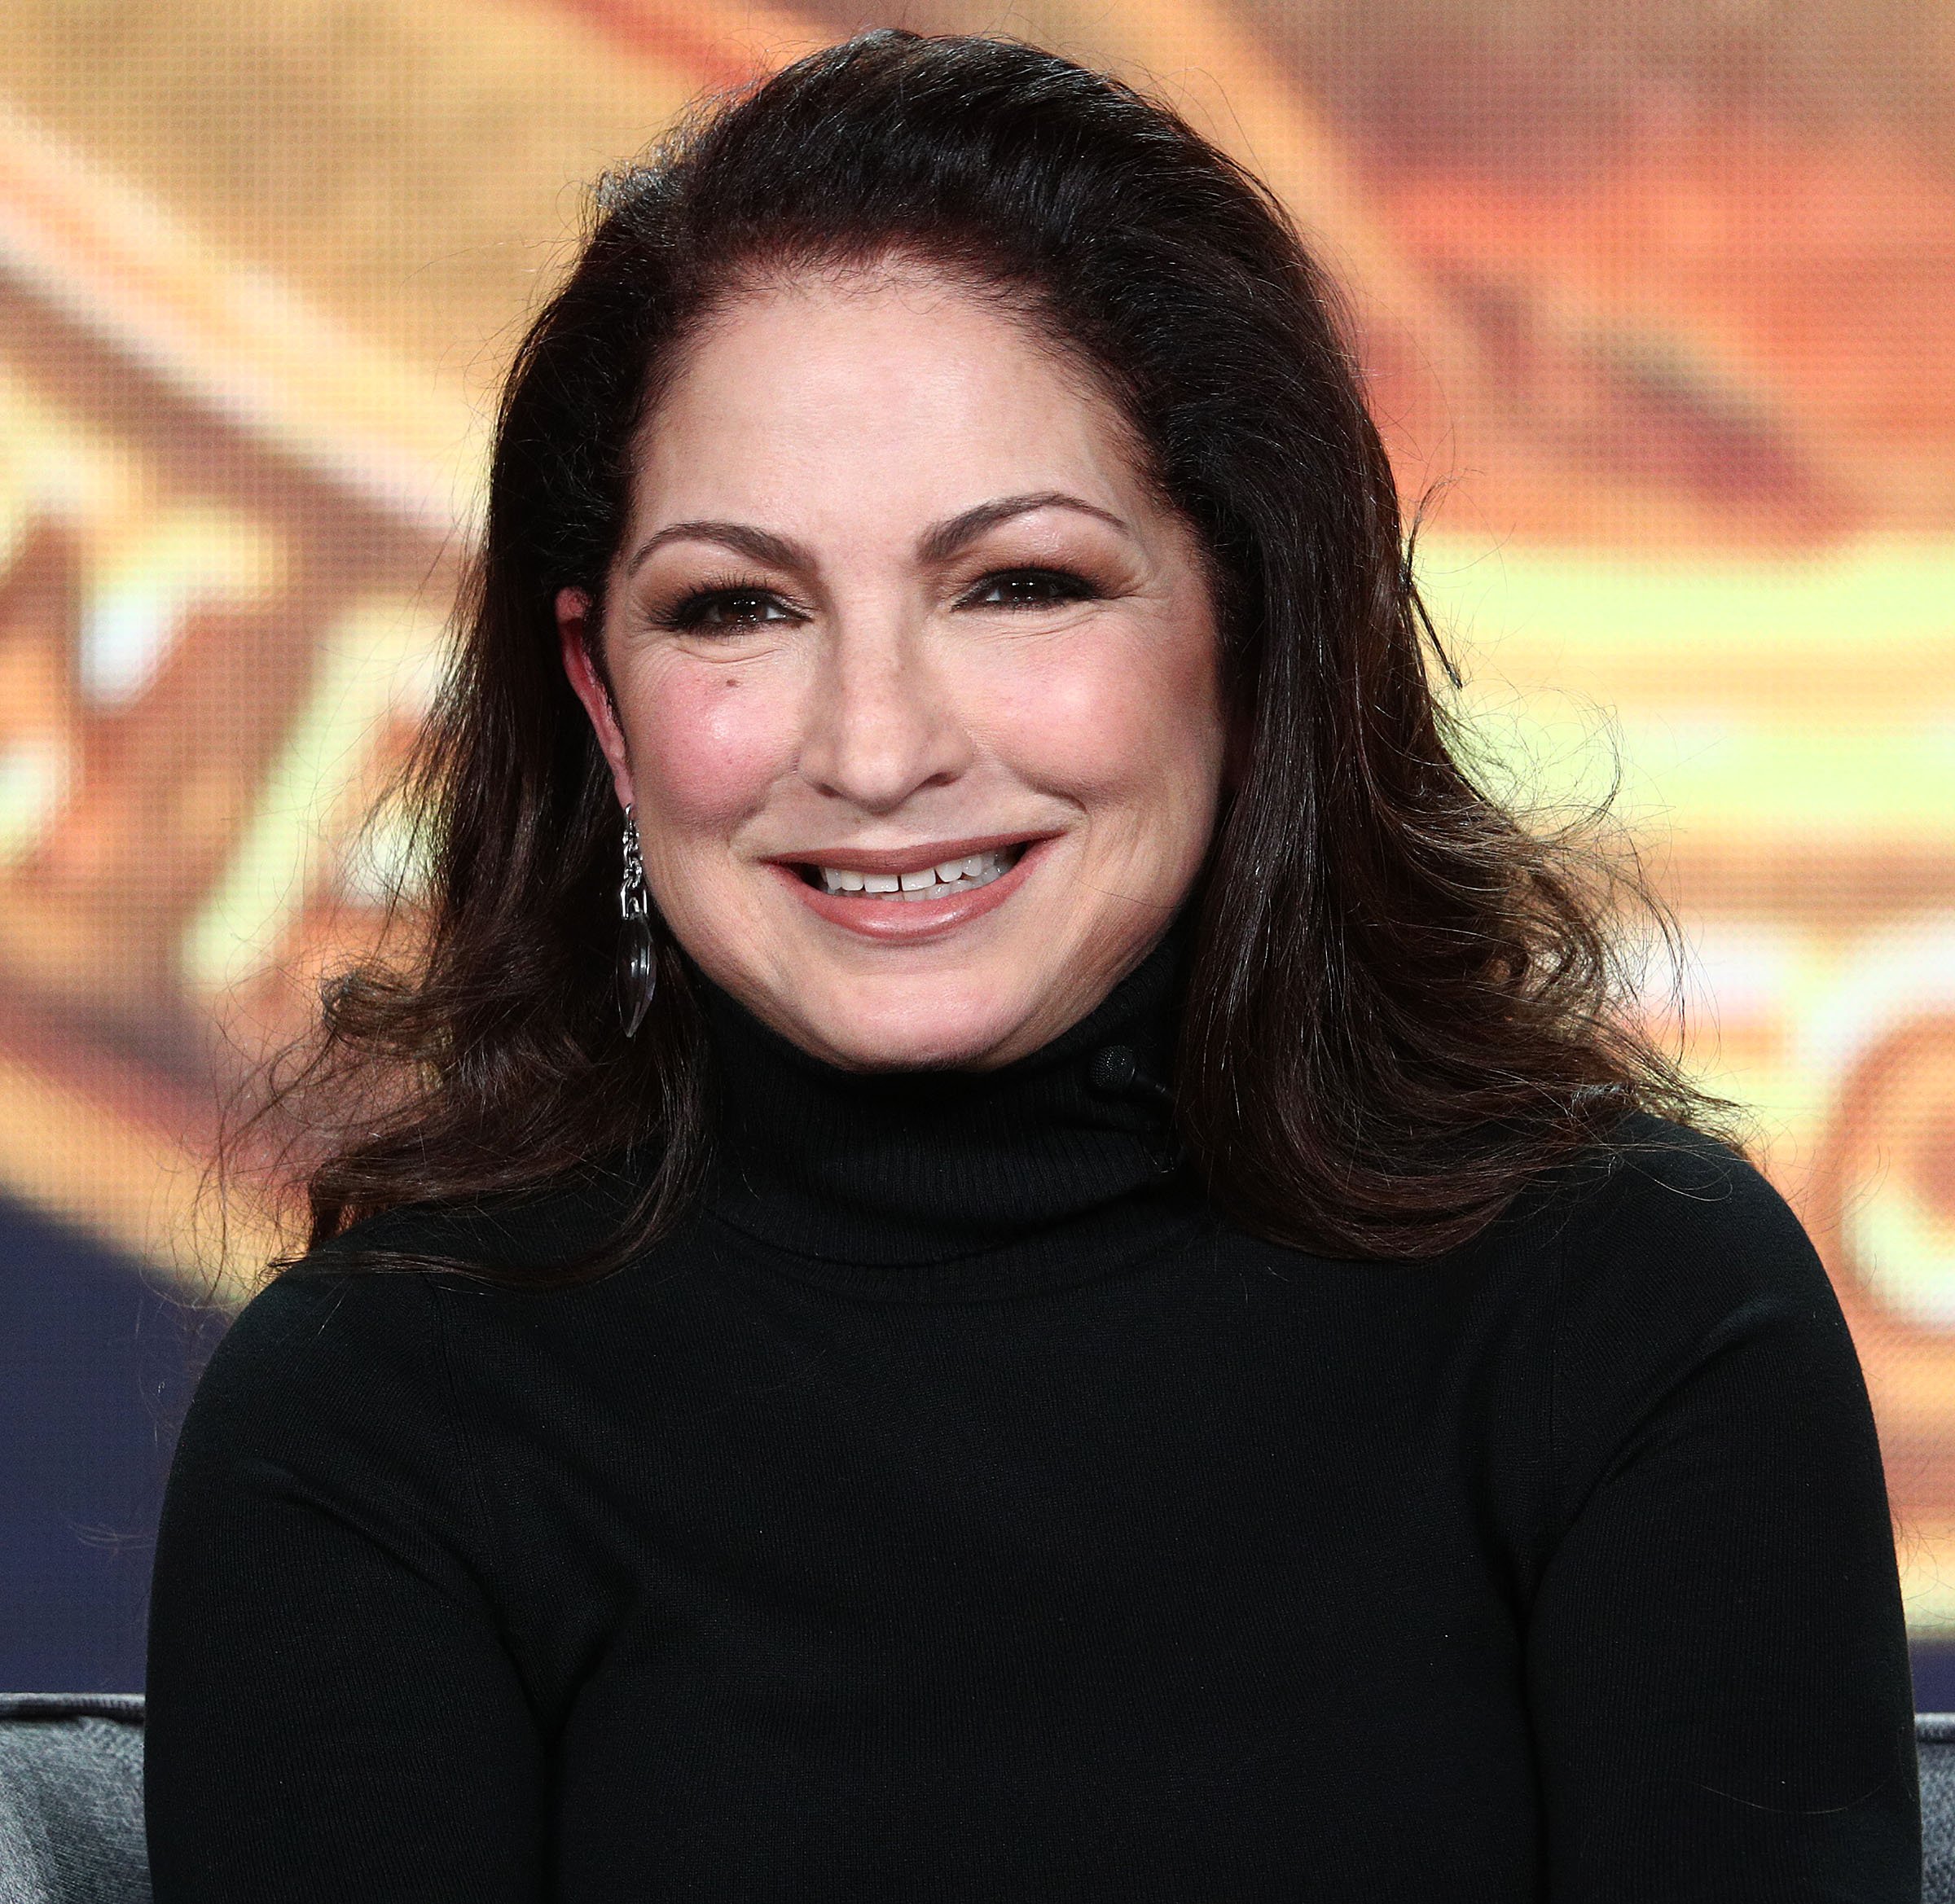 Gloria Estefan at the PBS segment of the 2019 Winter Television Critics Association Press Tour at The Langham Huntington, Pasadena on February 1, 2019 in Pasadena, California. | Sources: Getty Images